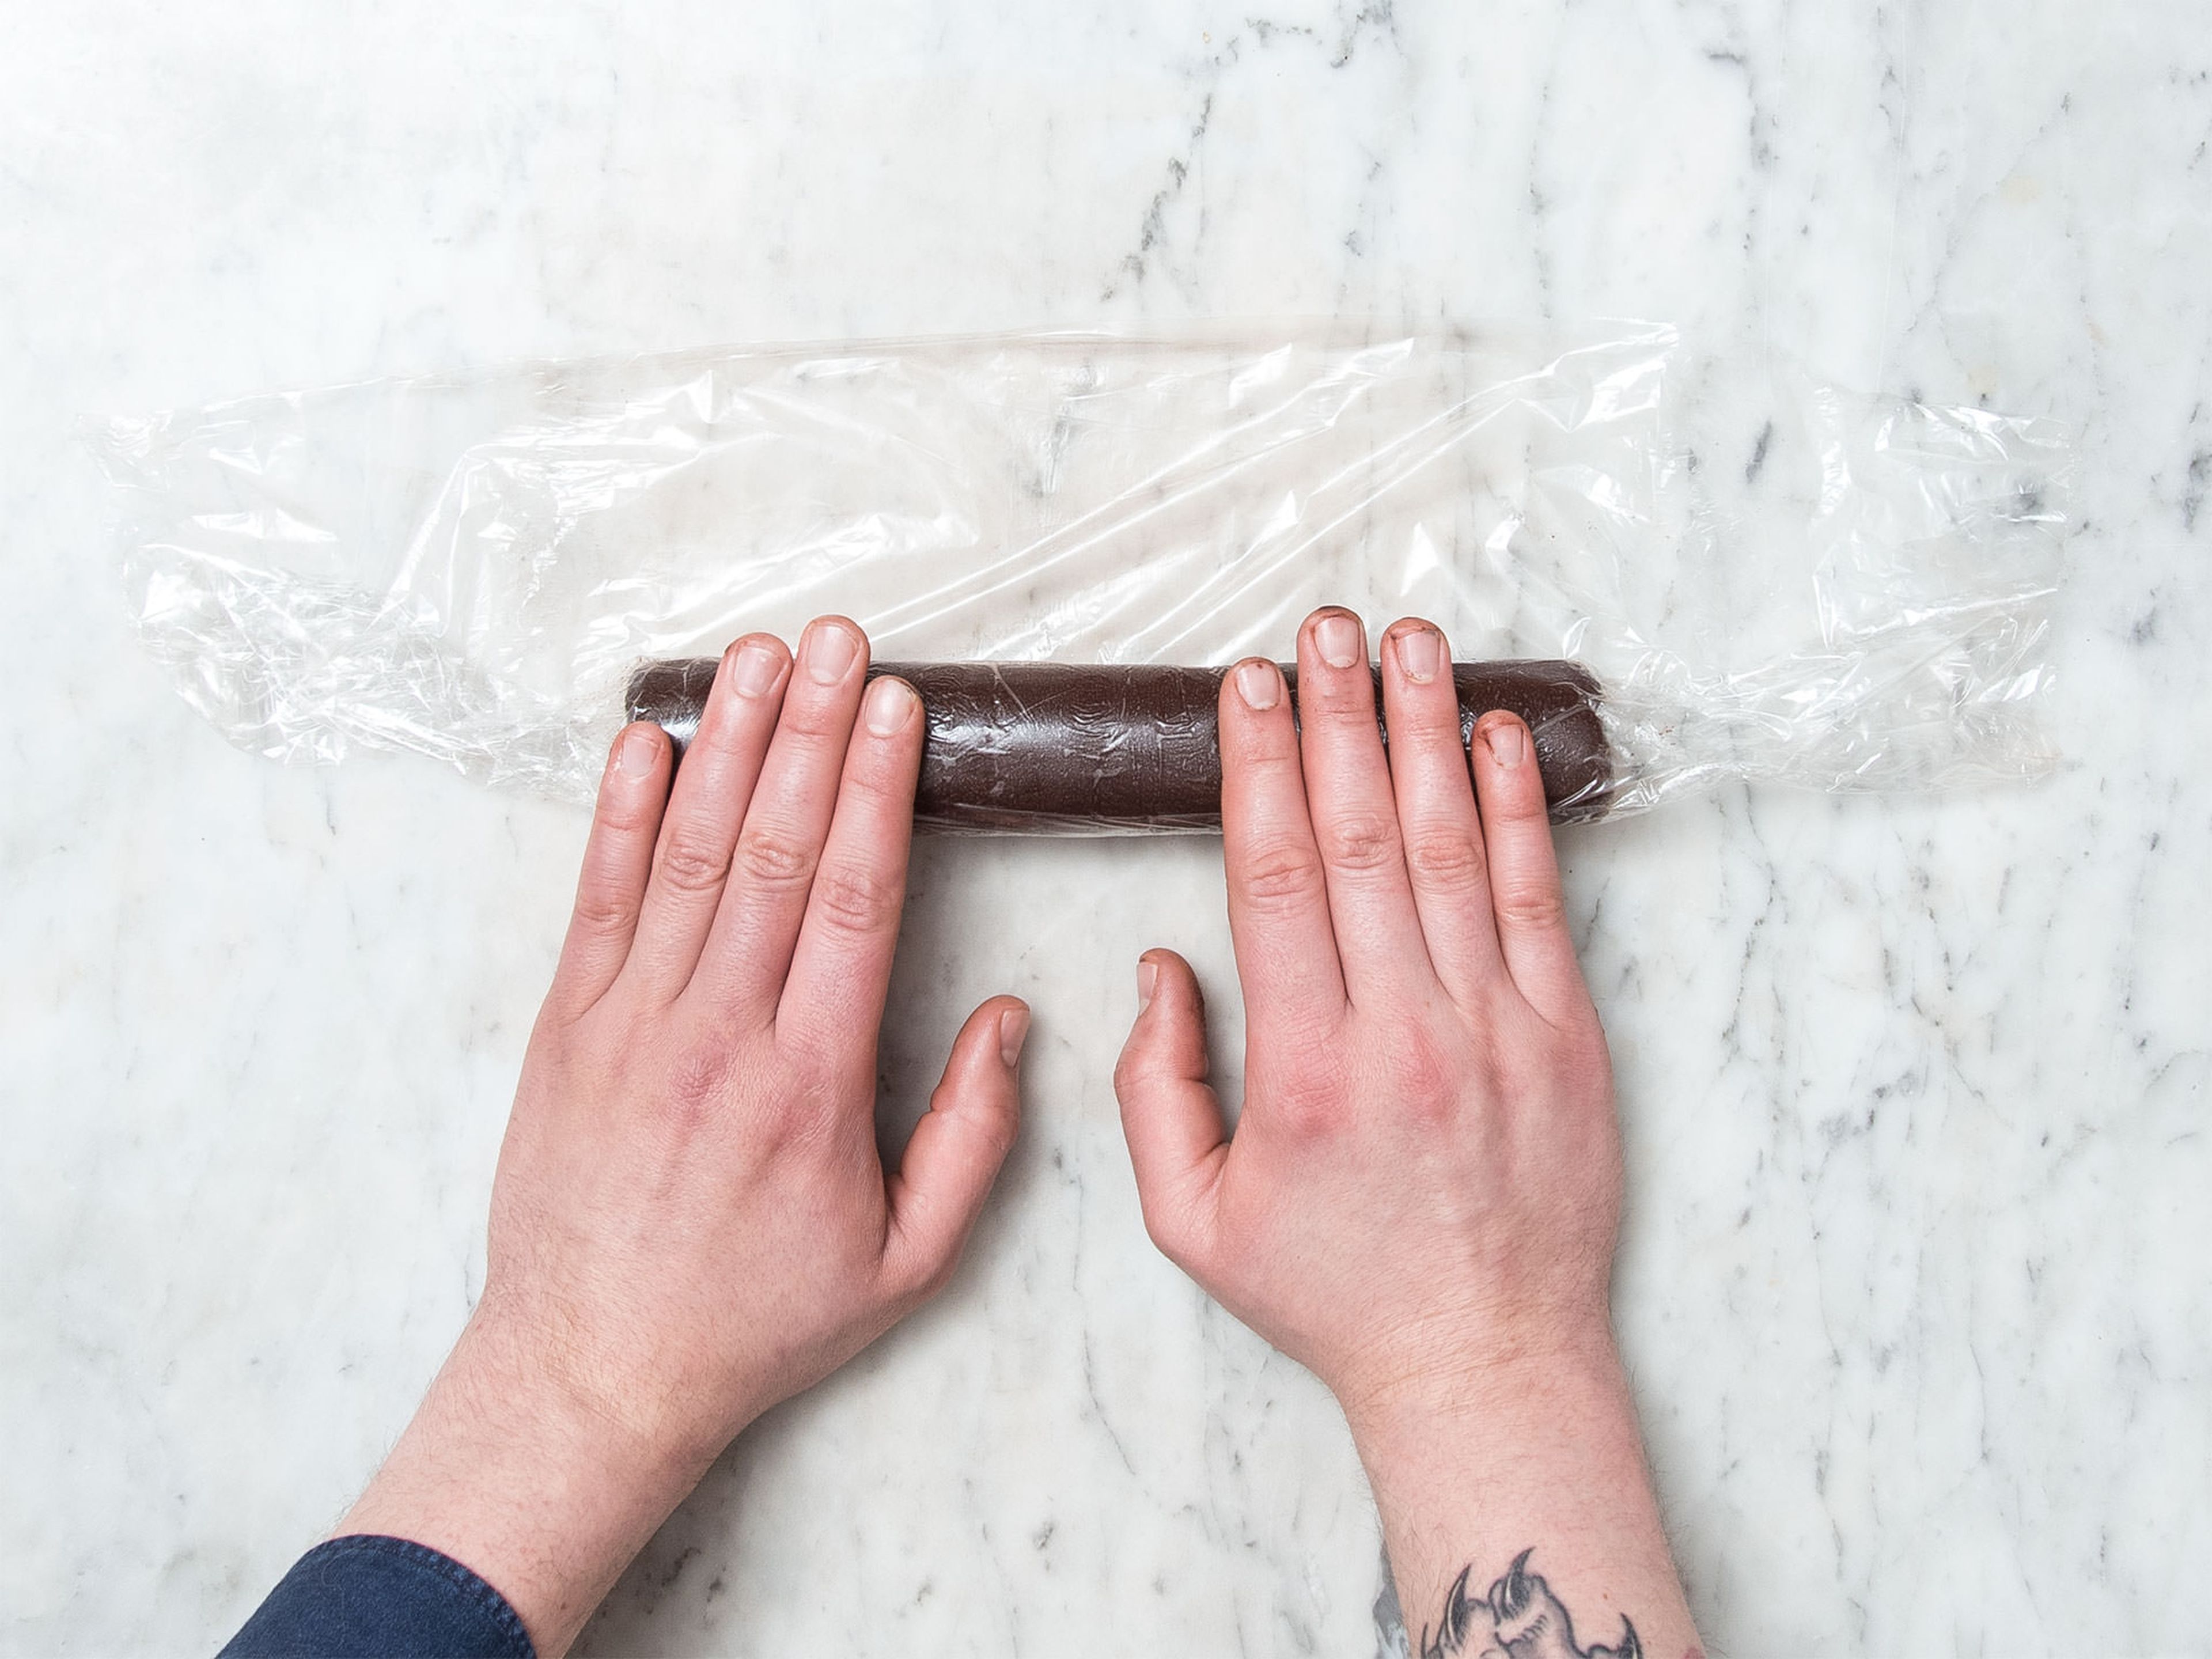 Roll dough into an approx. 5-cm/2-in. thick log. Wrap in plastic and let chill in the fridge for approx. 30 min.